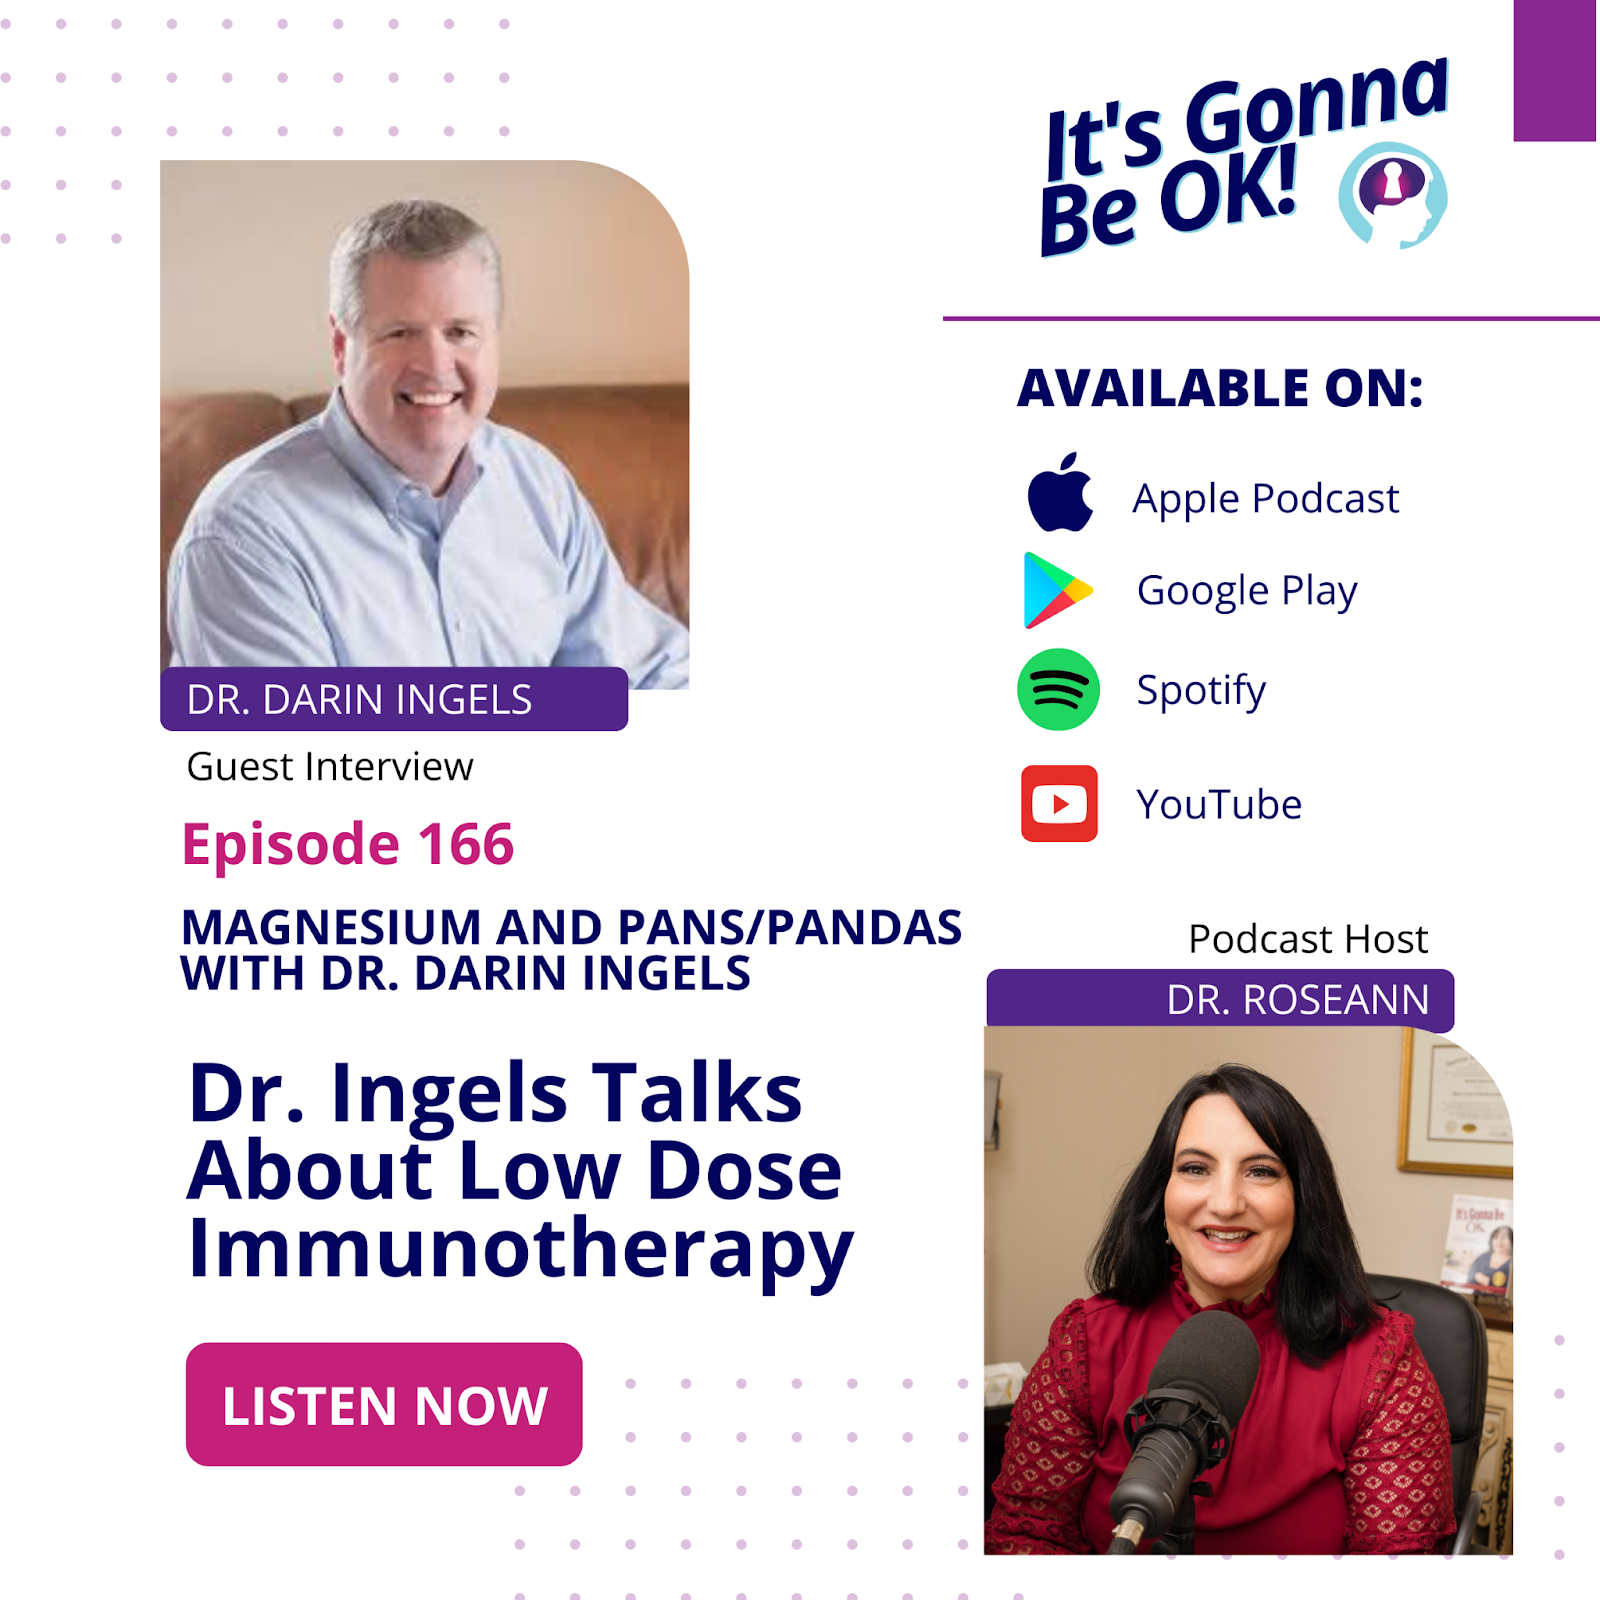 Episode 166 Dr. Ingels Talks About Low Dose Immunotherapy